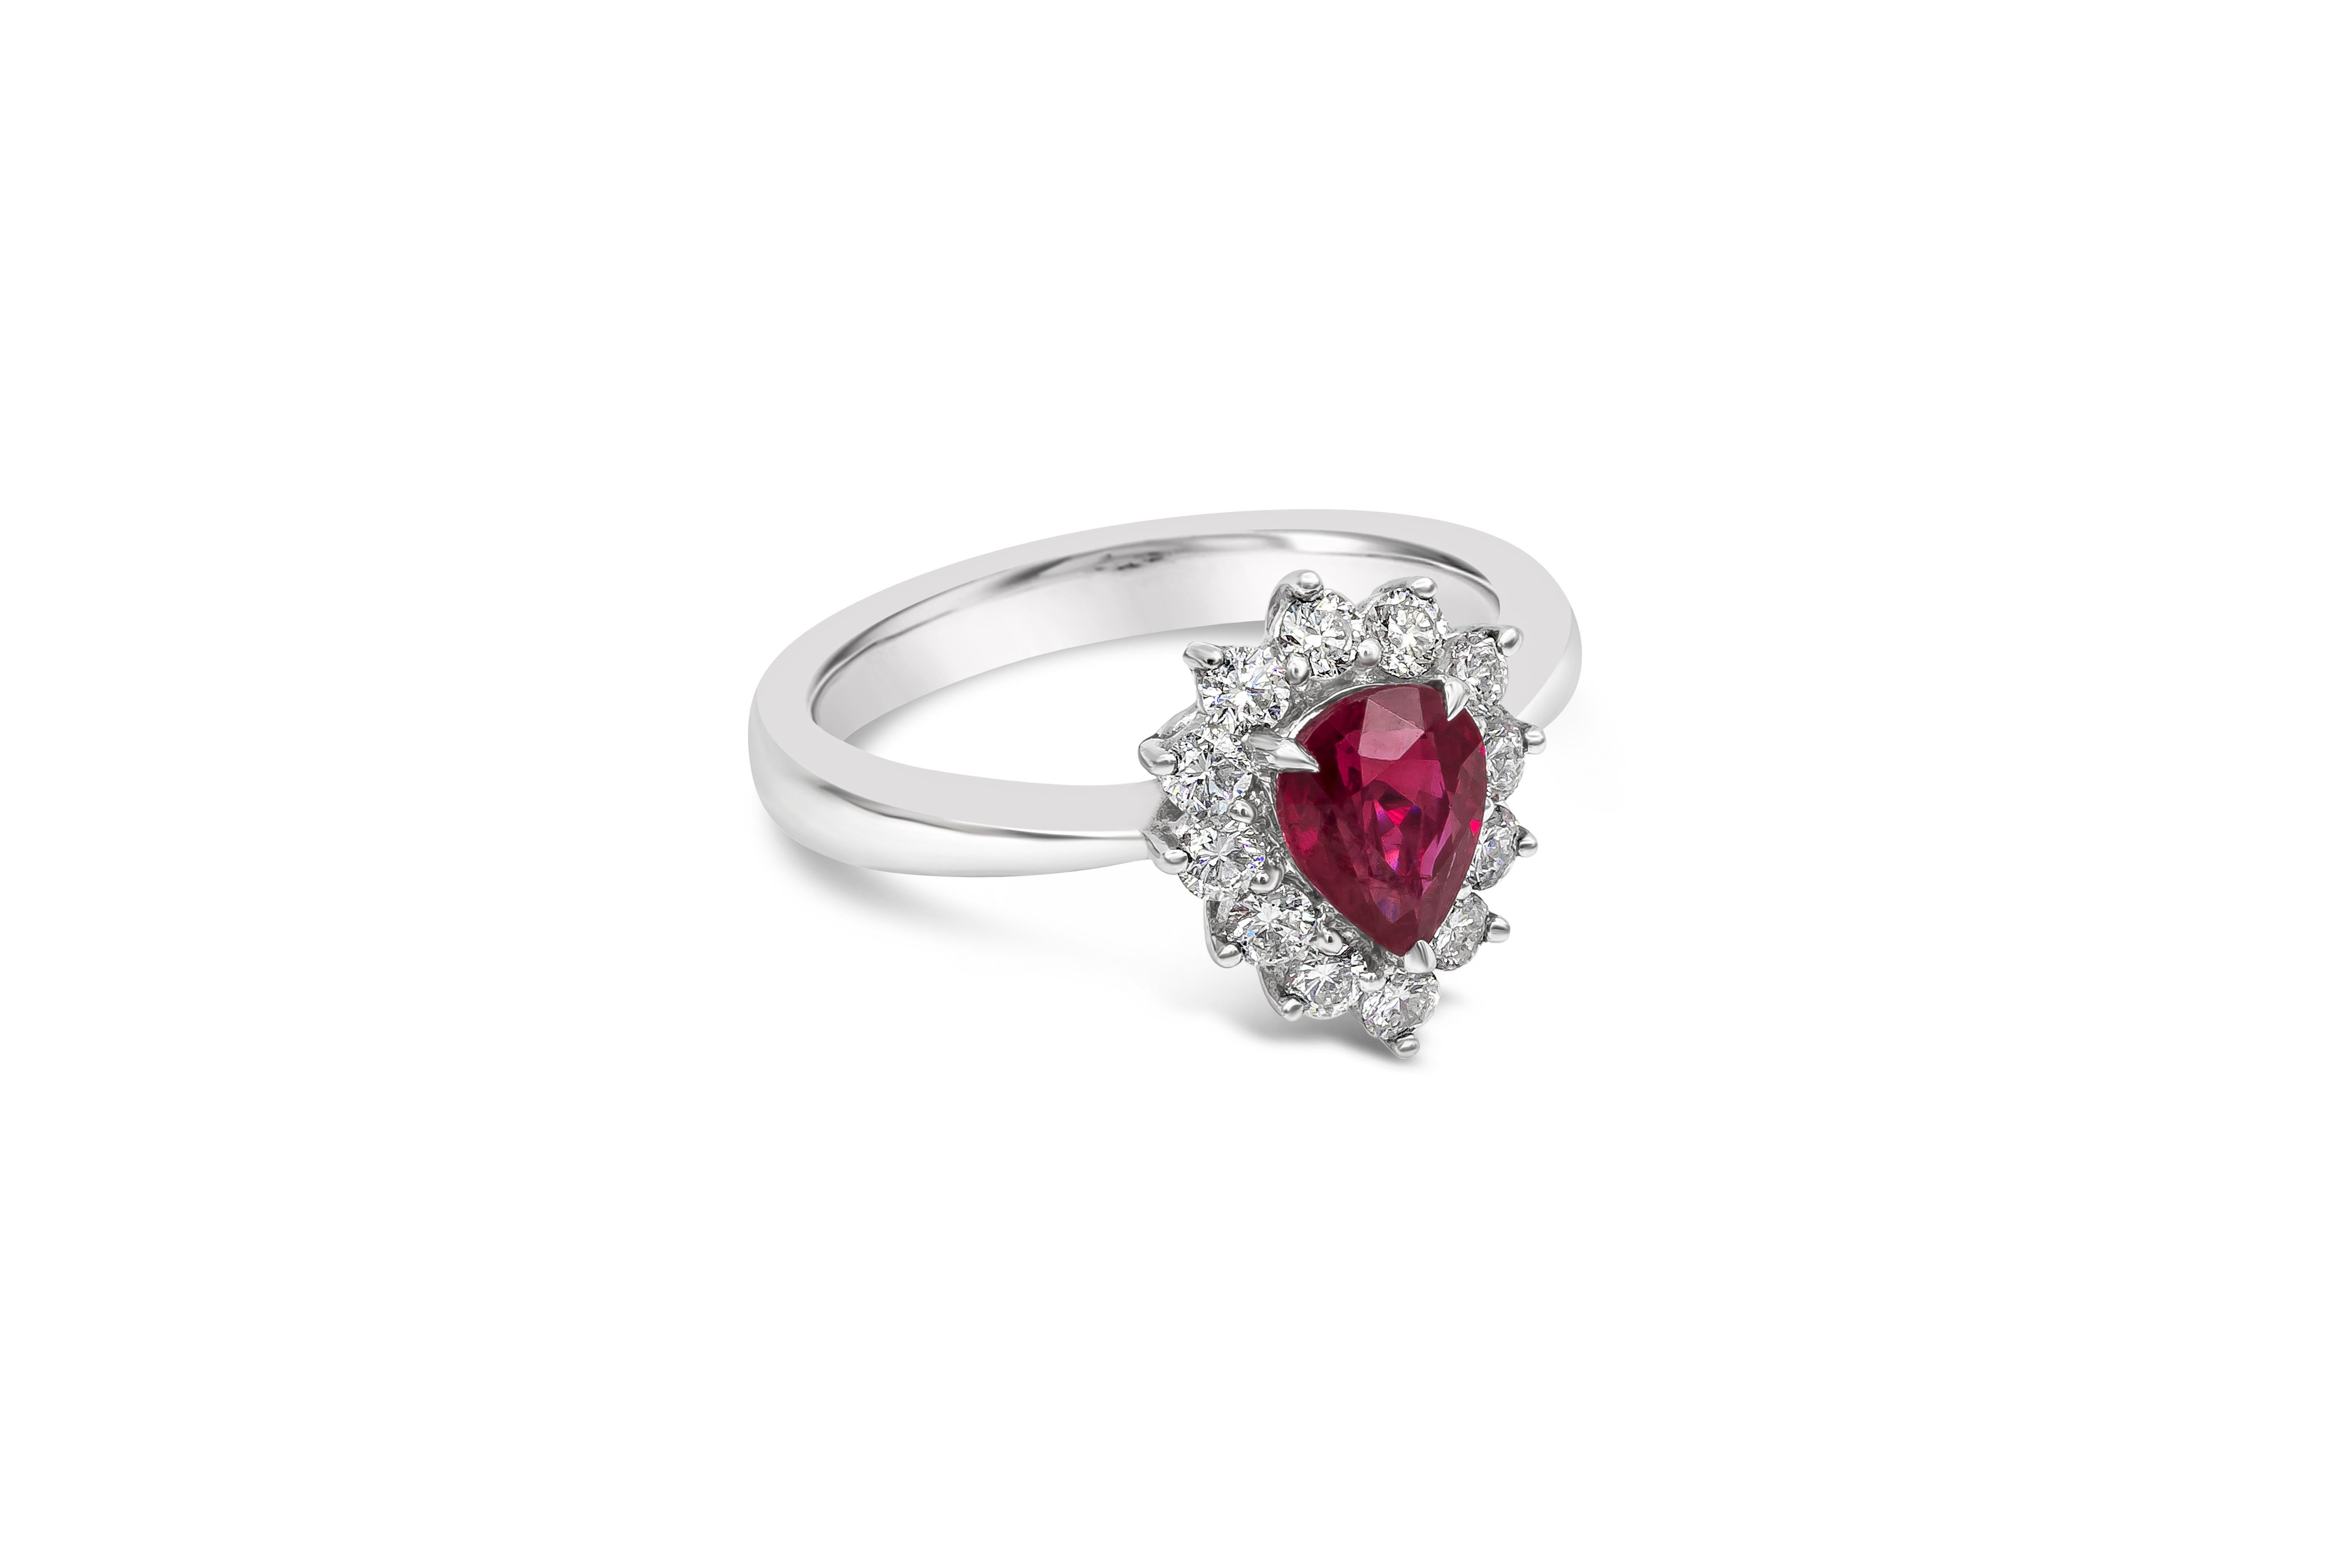 A beautiful and unique engagement ring style showcasing a 1.11 carats color-rich pear shape ruby. Surrounded by a single row of brilliant round diamond weighing 0.46 carats total. Finely made in 18k white gold. Size 6.5 US resizable upon